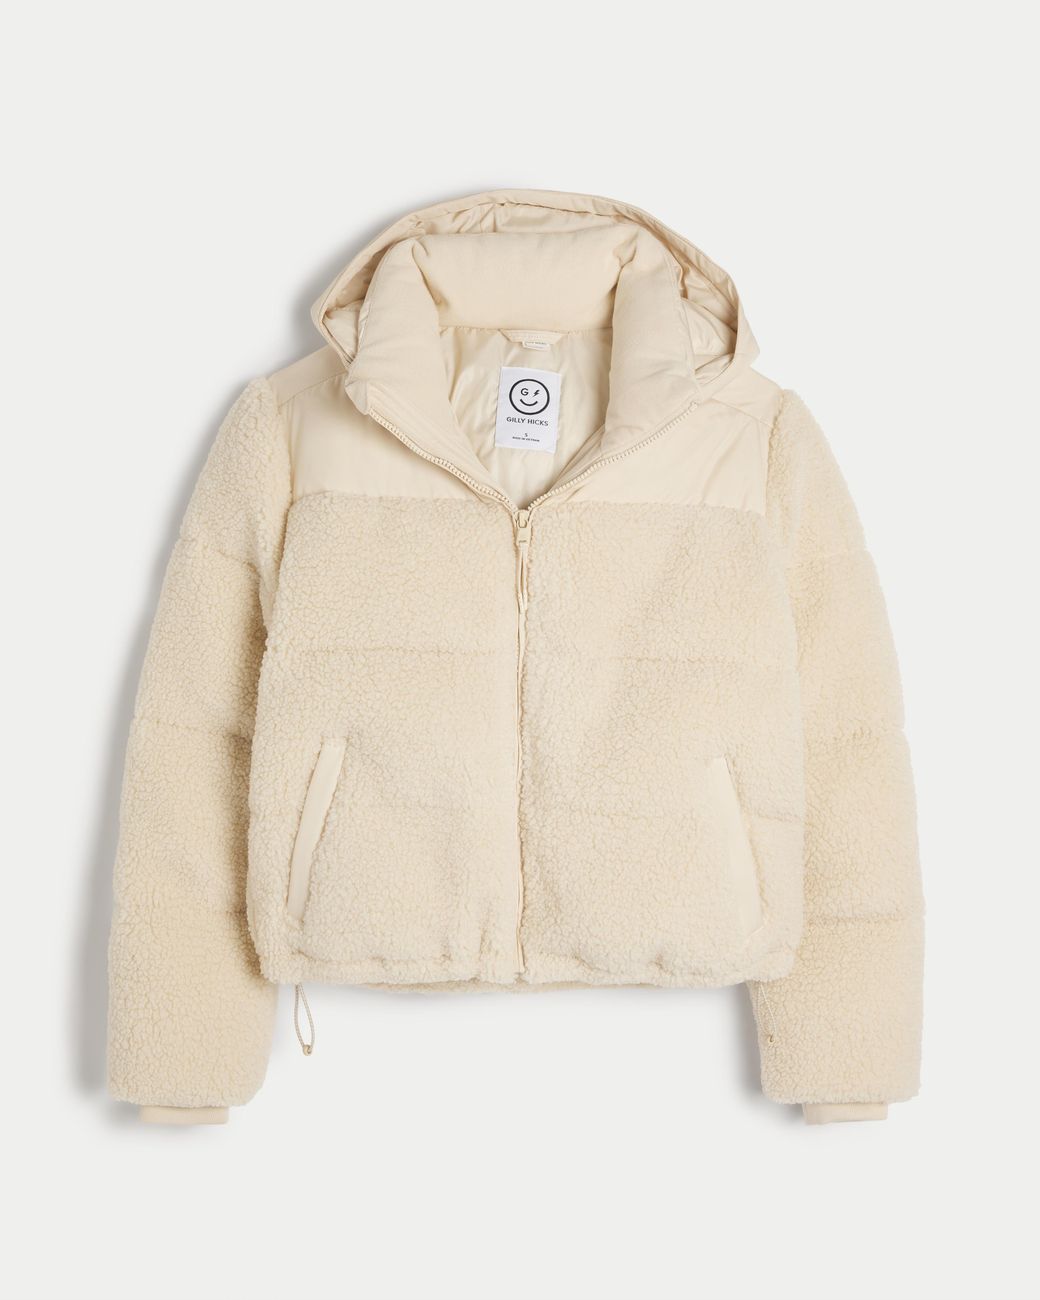 Hollister Gilly Hicks Sherpa Puffer Jacket in Natural